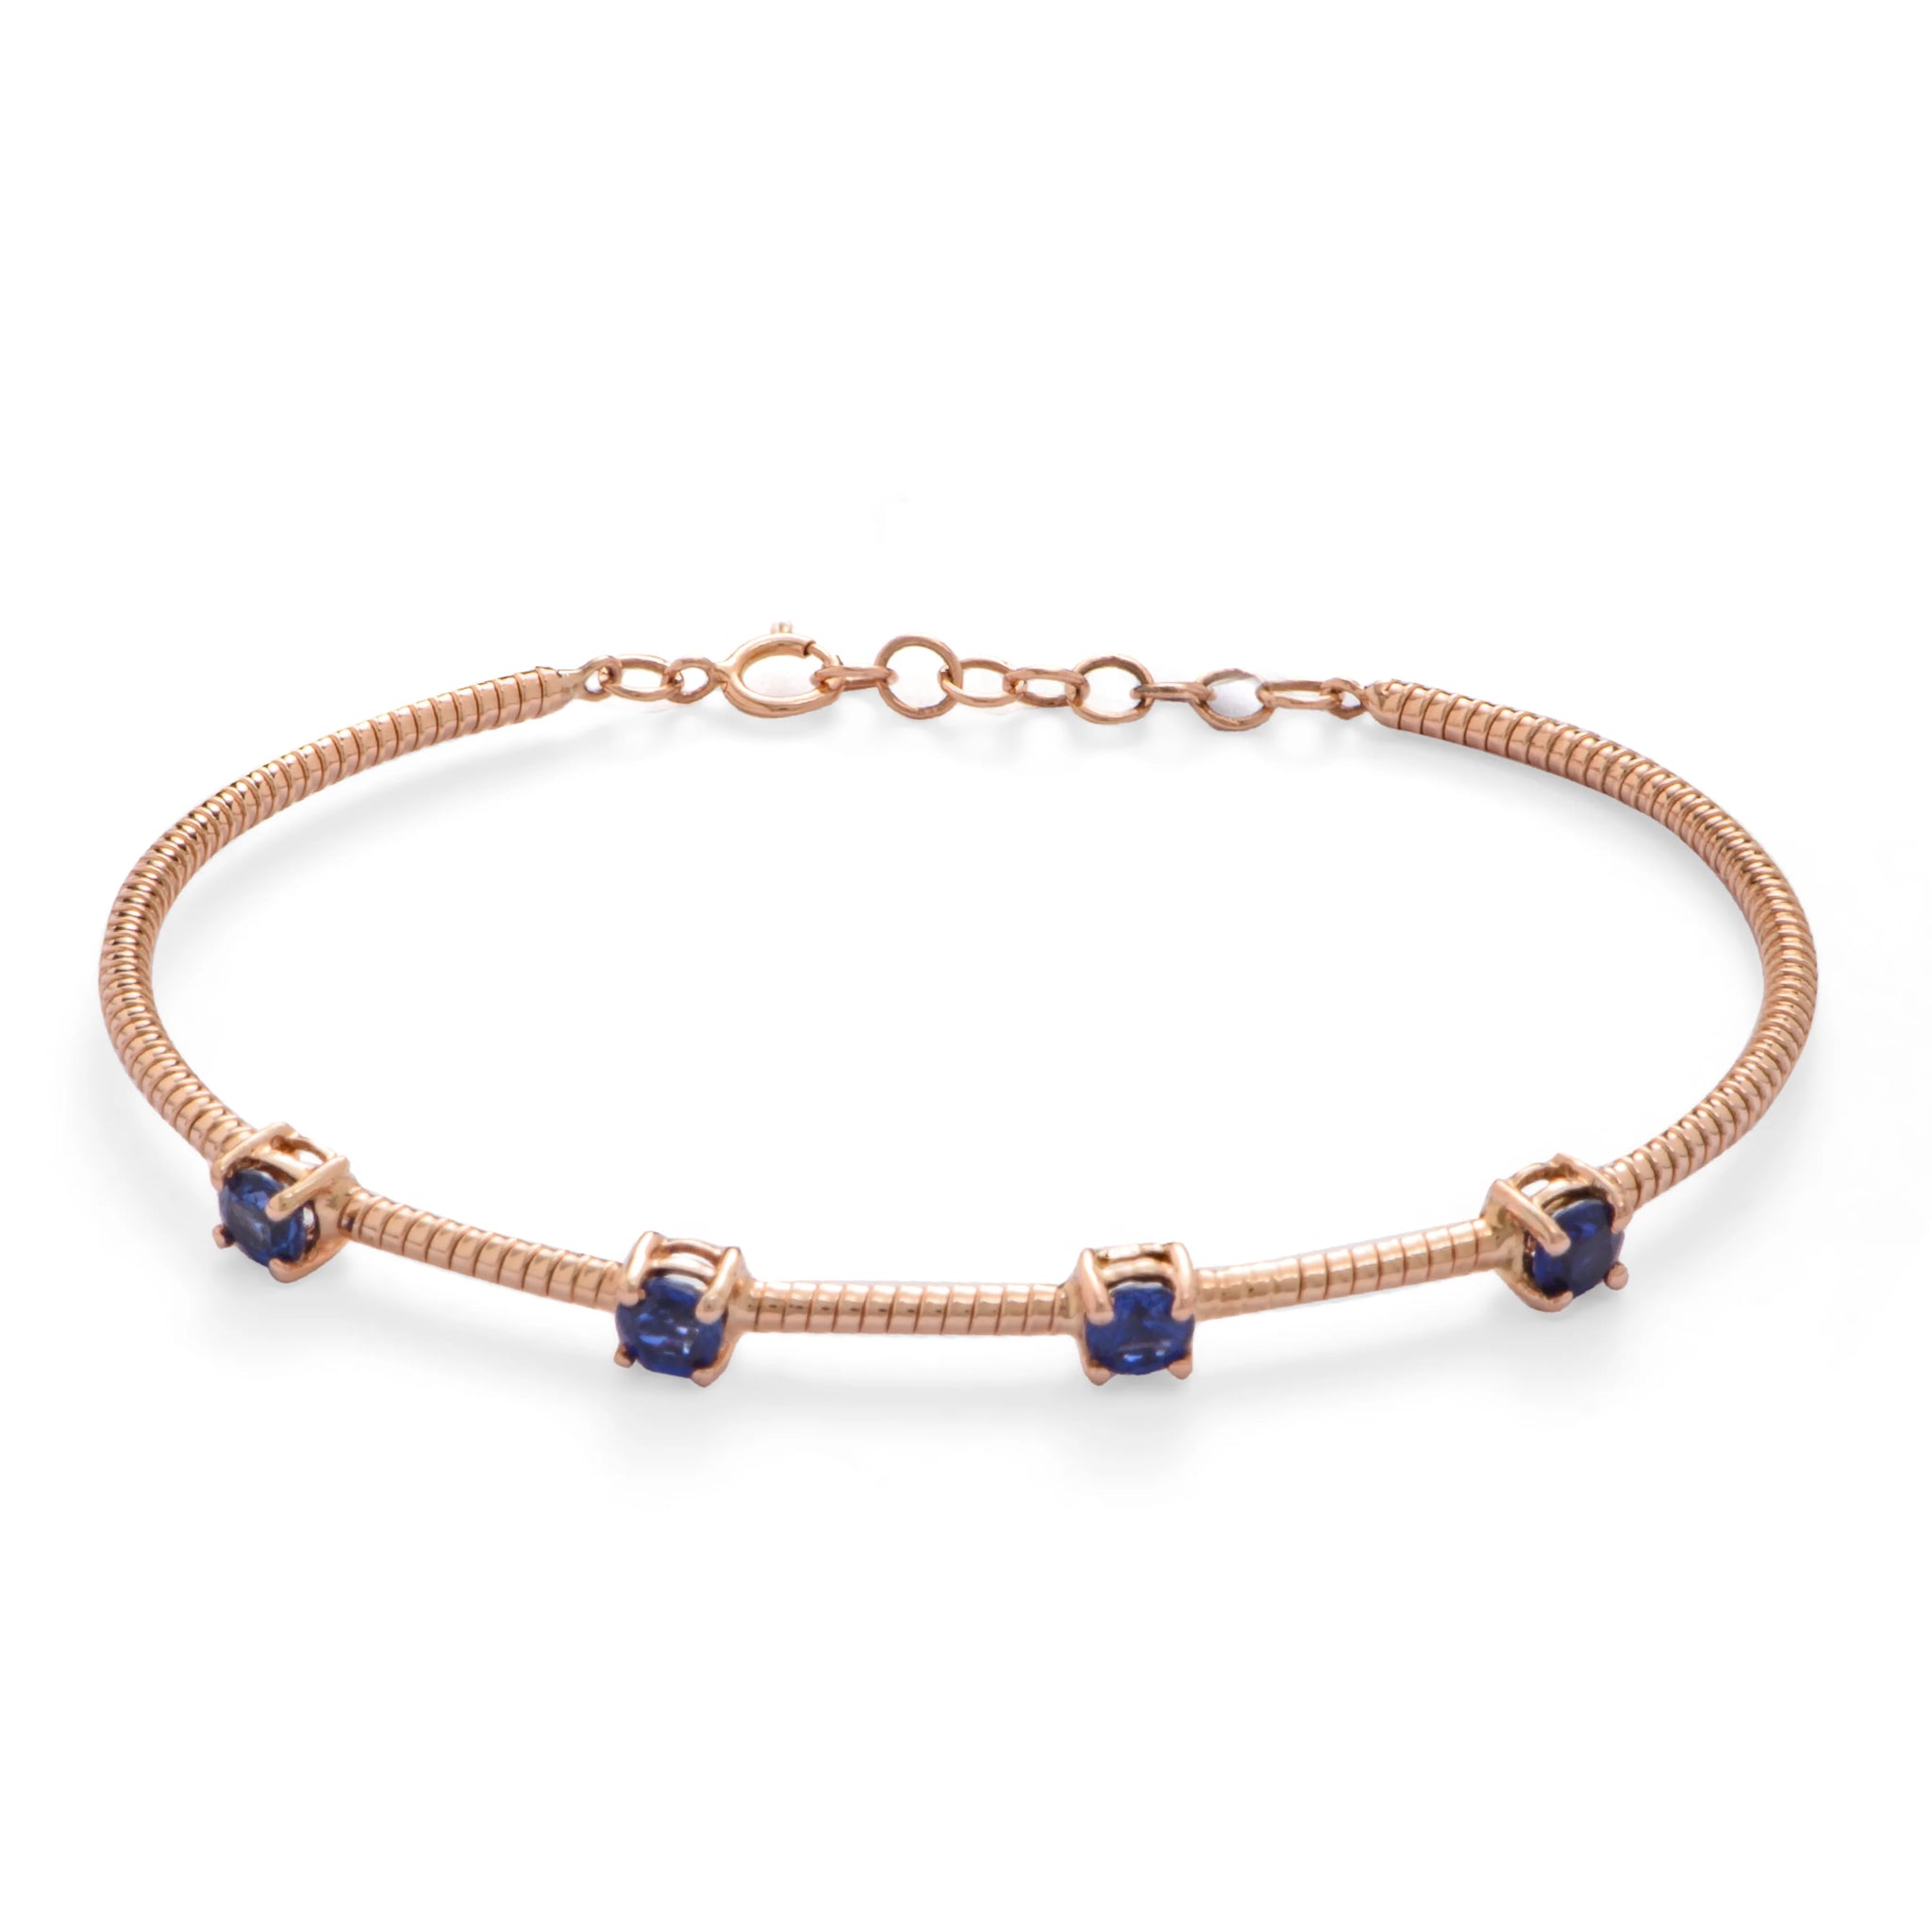 4 Sapphire Crystals embedded in rose coiled Bangle Bracelet in Rose 18 K Gold - S-X23B